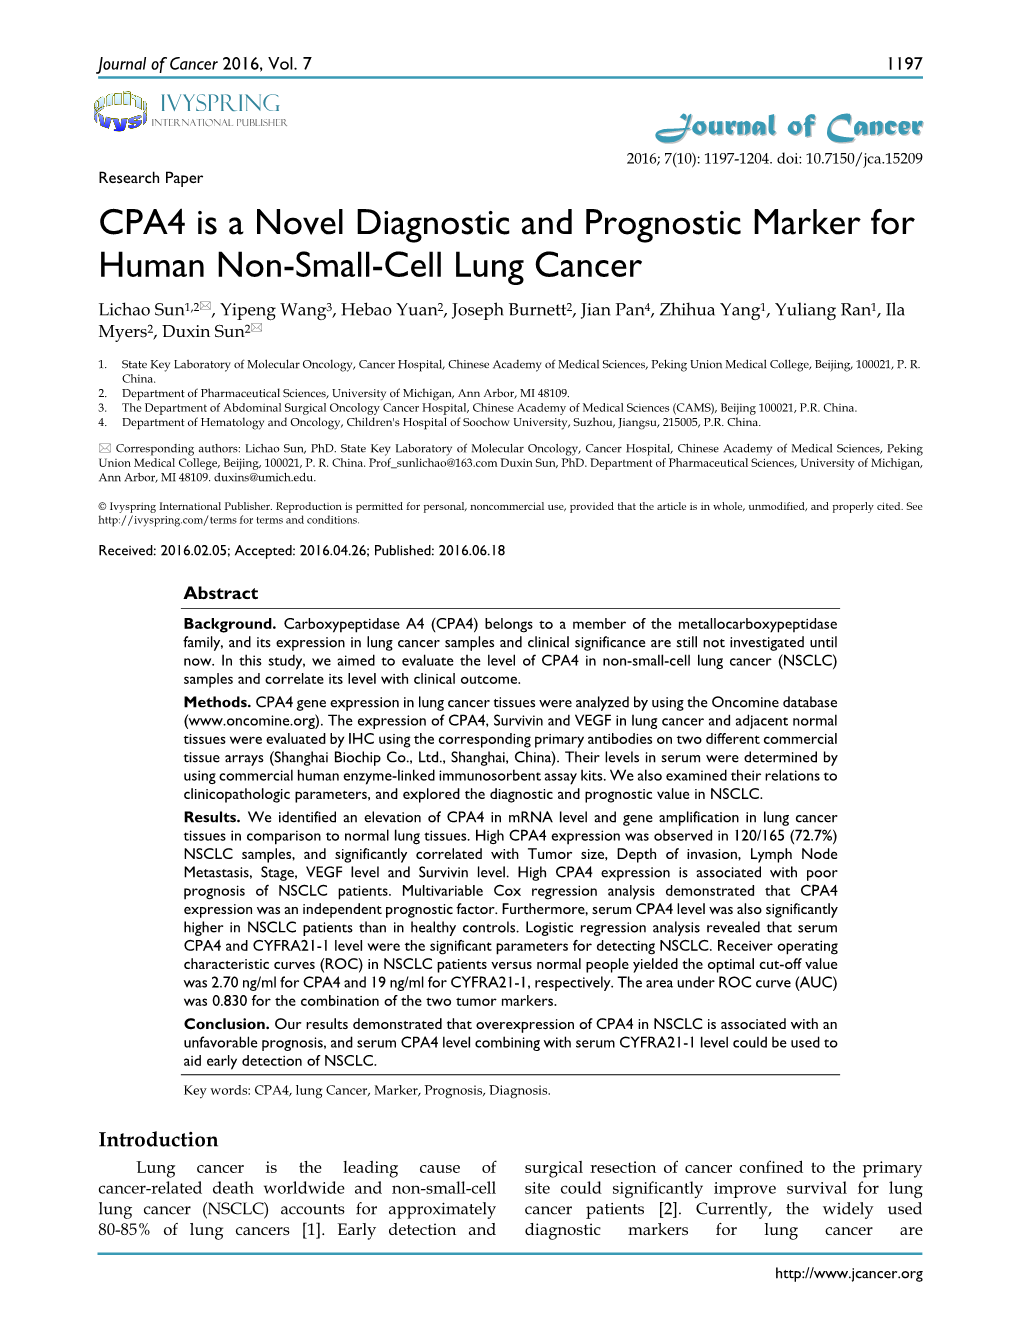 CPA4 Is a Novel Diagnostic and Prognostic Marker for Human Non-Small-Cell Lung Cancer